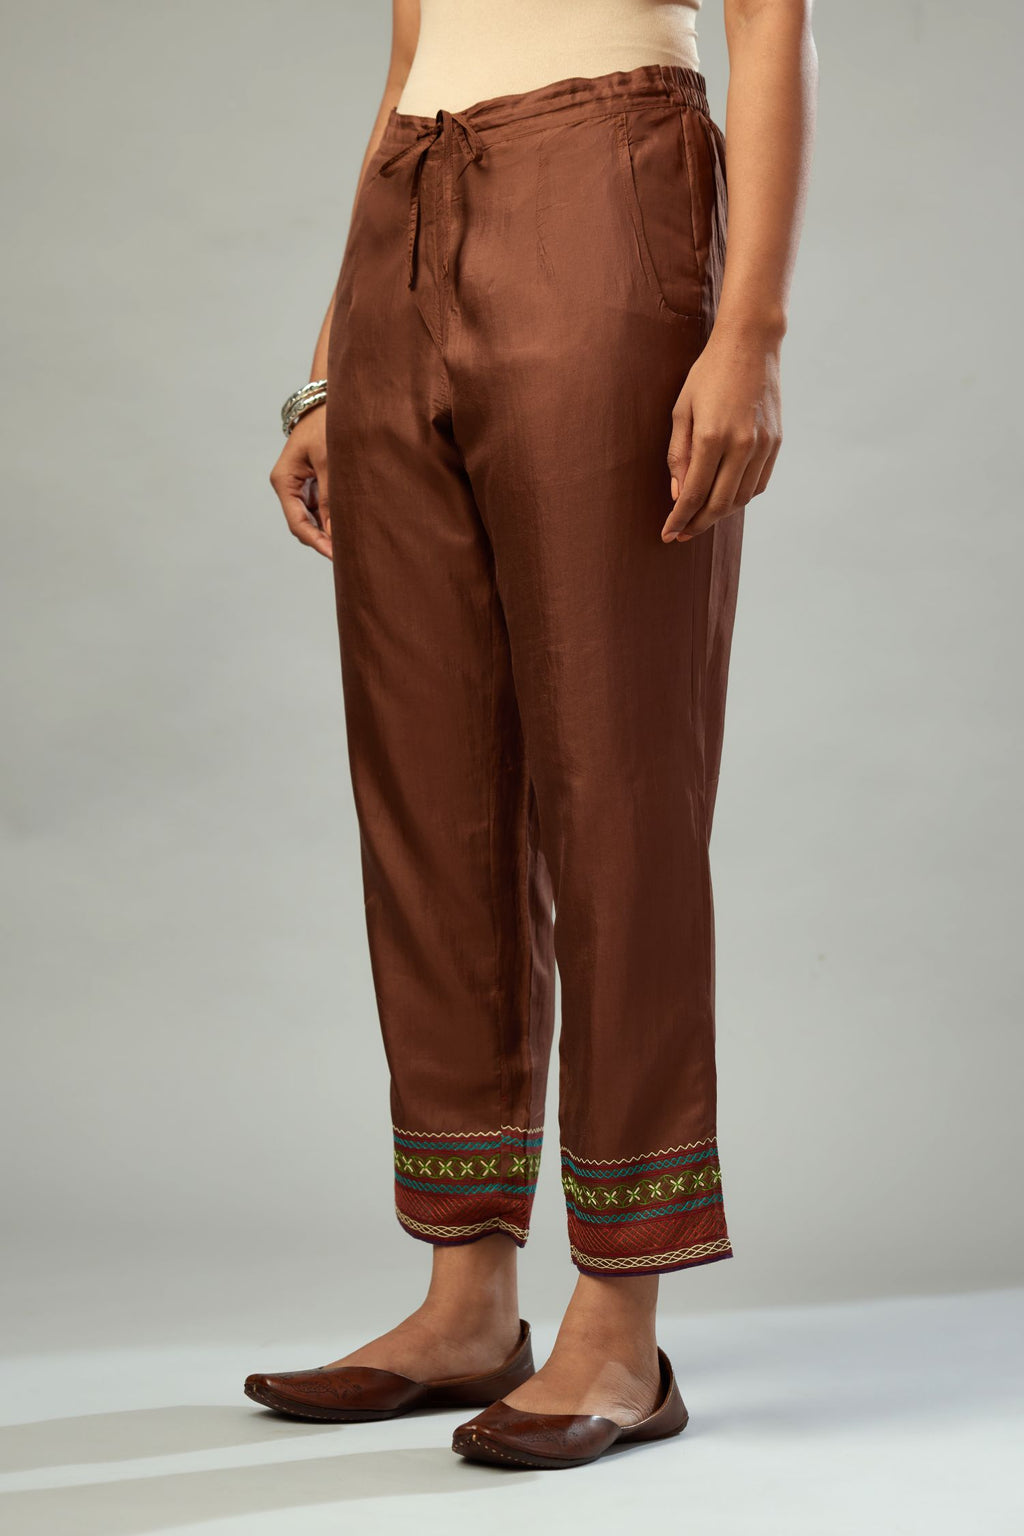 Brown silk straight pants detailed with quilted multi colored embroidery at bottom.